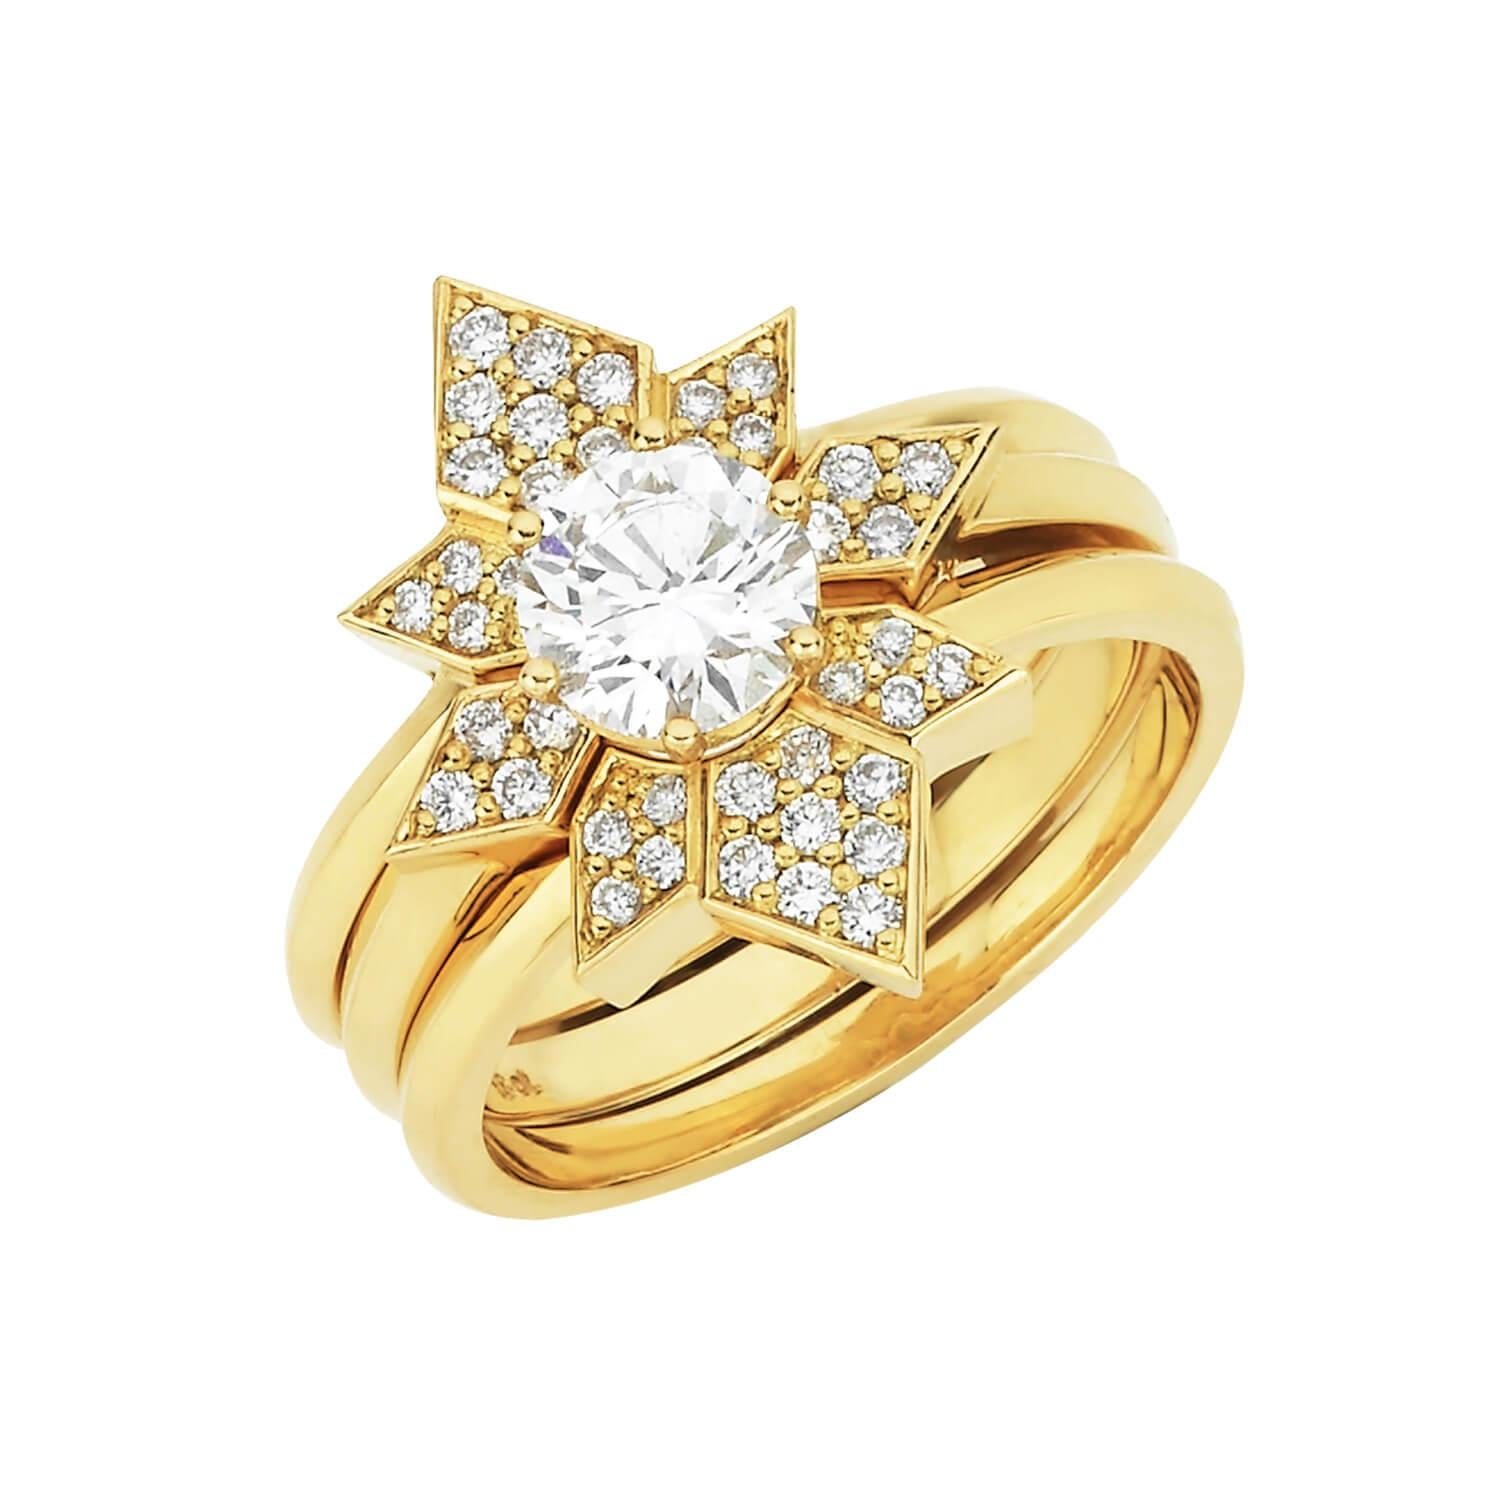 The Dahlia and Amara Ring Set is a symbol of the spark of love. 
The wedding bands create a radiant geometrical shape with the solitaire diamond shining brightly from within. 

18k yellow gold engagement ring, with a centre diamond of 0.65ct, Round